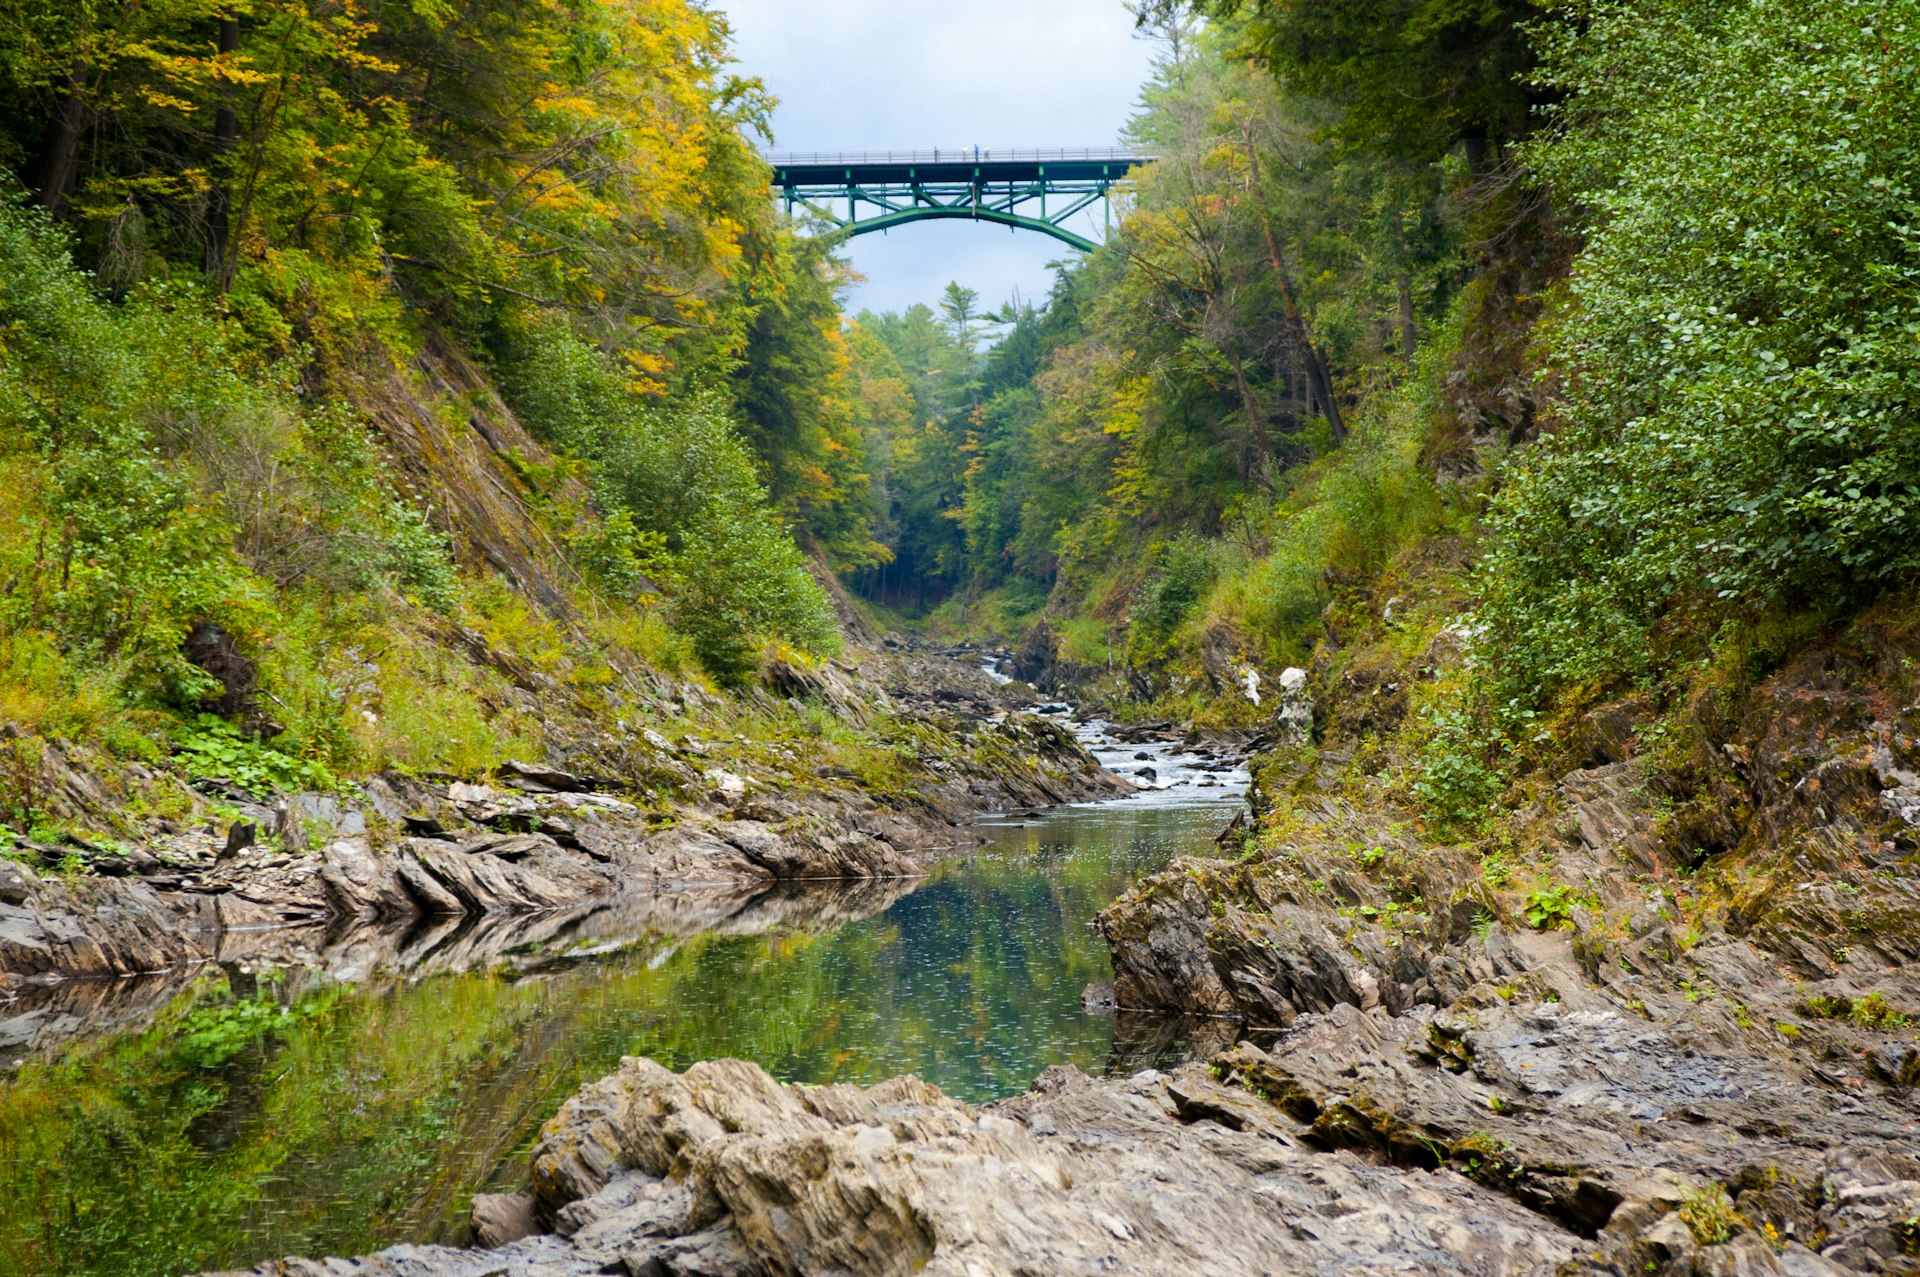 A river running through a tree-lined gorge